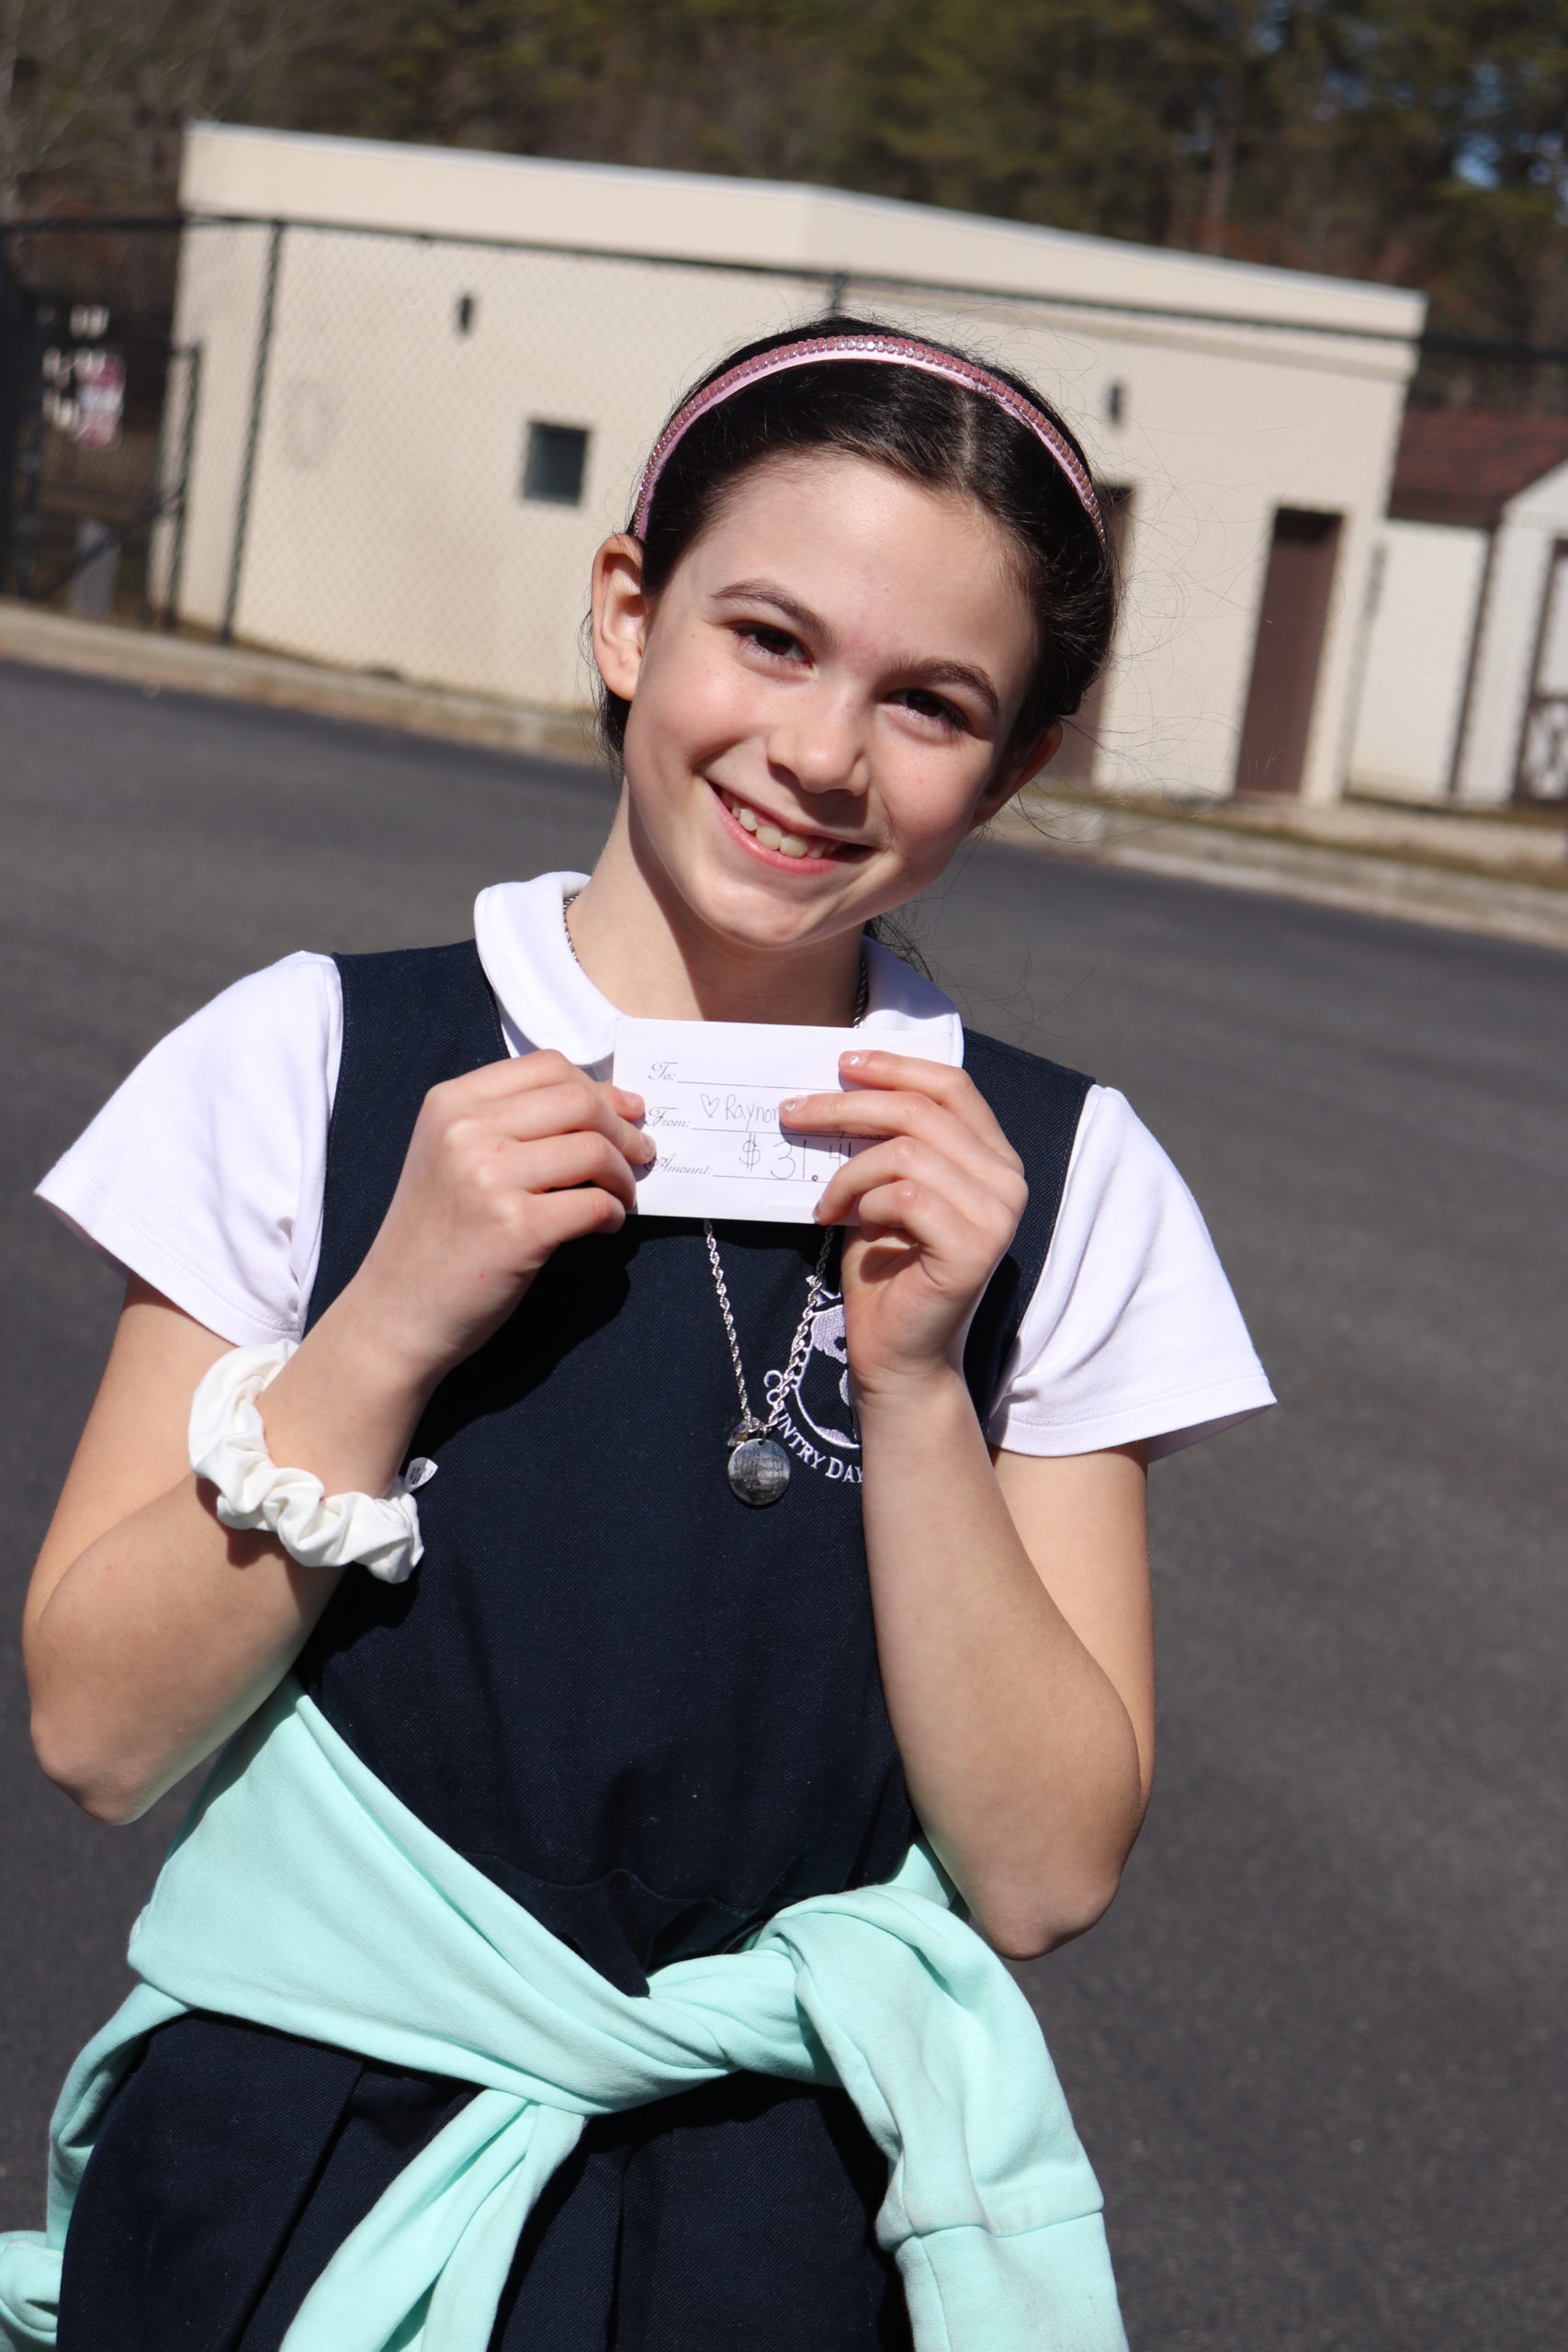 Fourth-grade student, Luna Pulver, poses proudly with her gift certificate for $31.41 of 